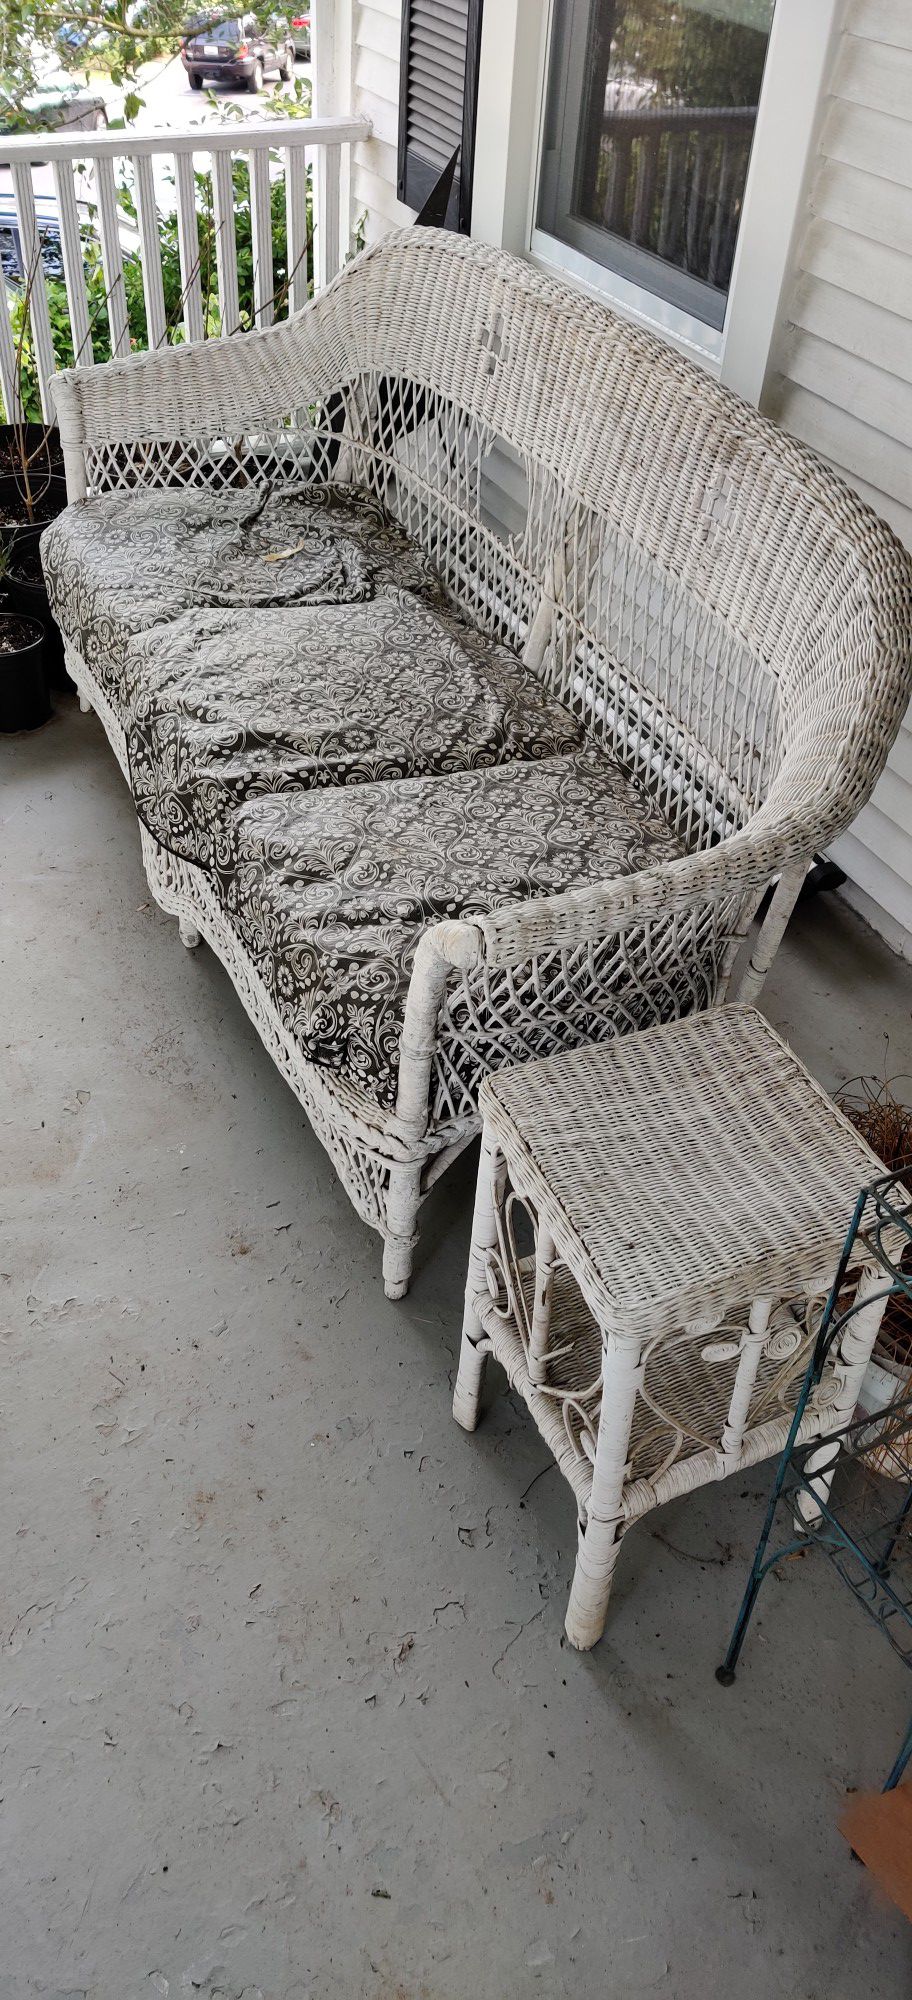 Free outdoor wicker chair and side table